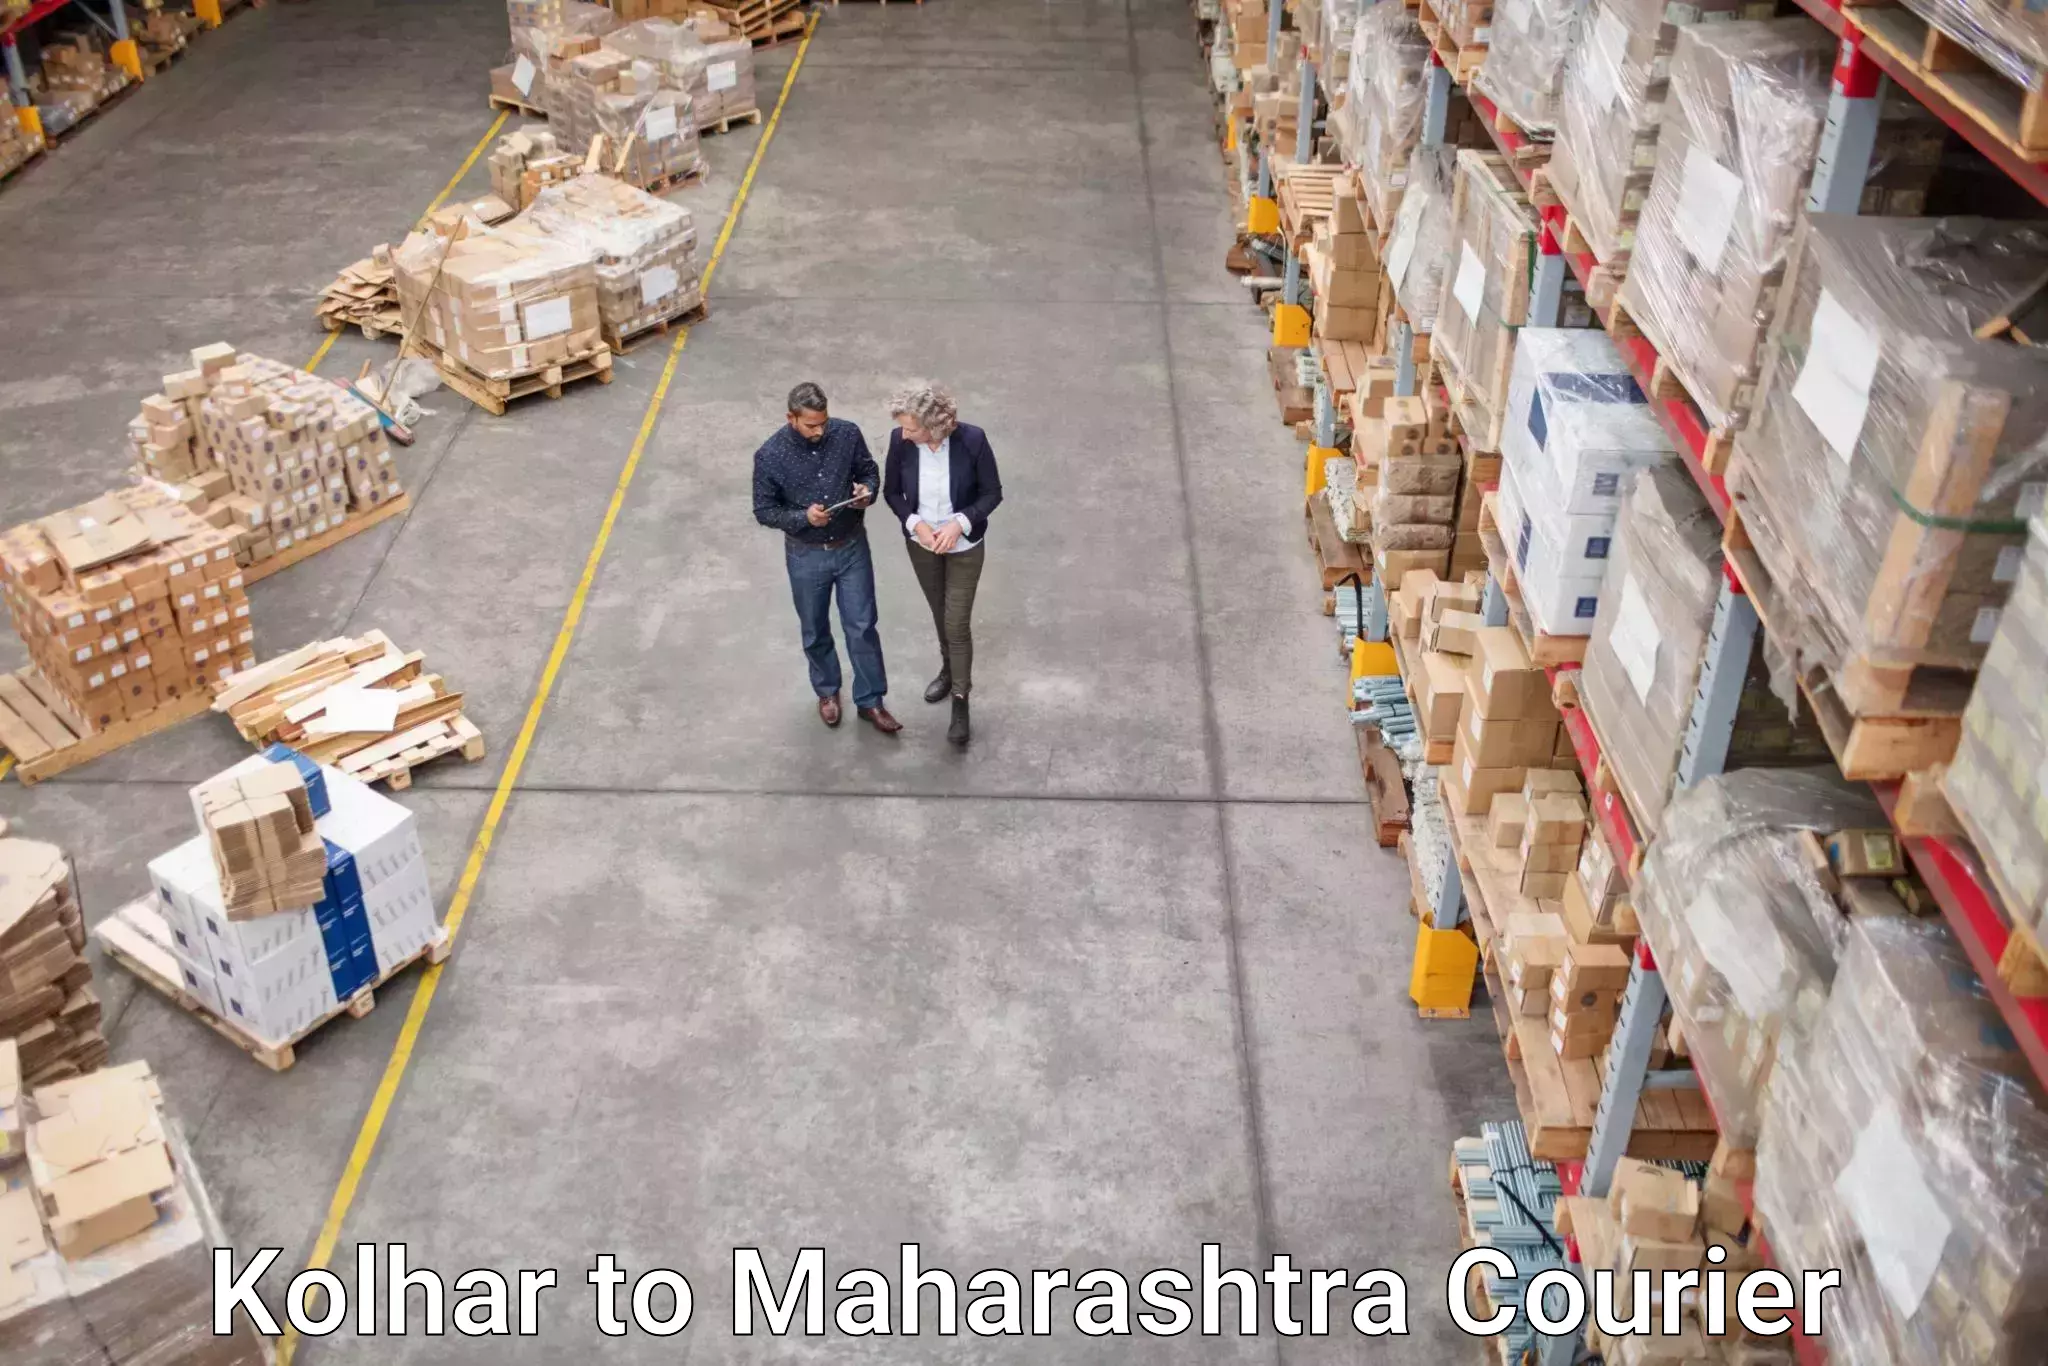 On-demand delivery in Kolhar to Maharashtra